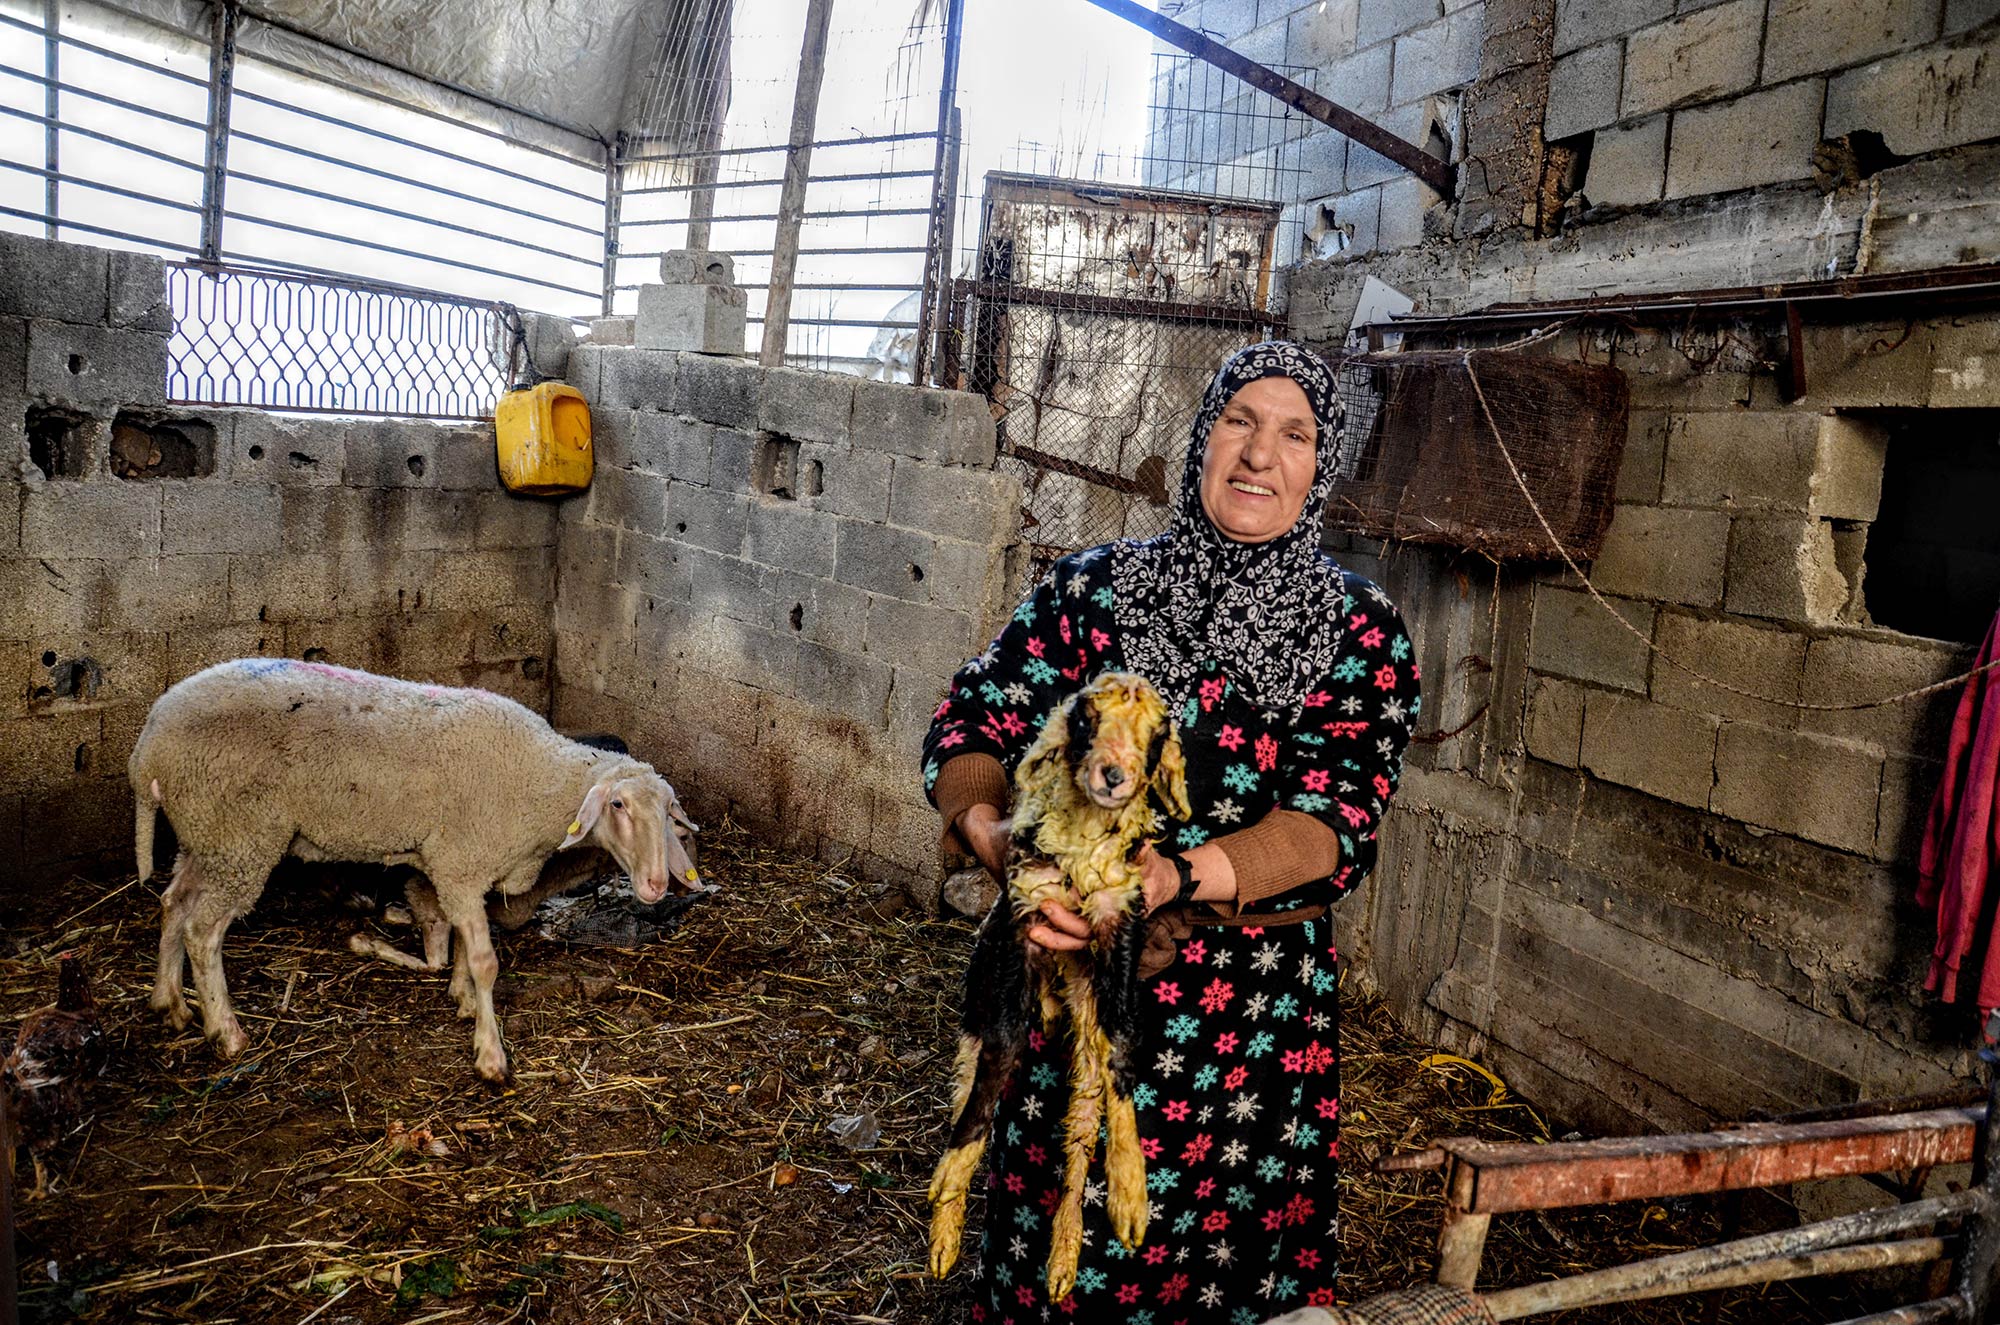 Women Can participant Naiima on her farm holding the newborn sheep.